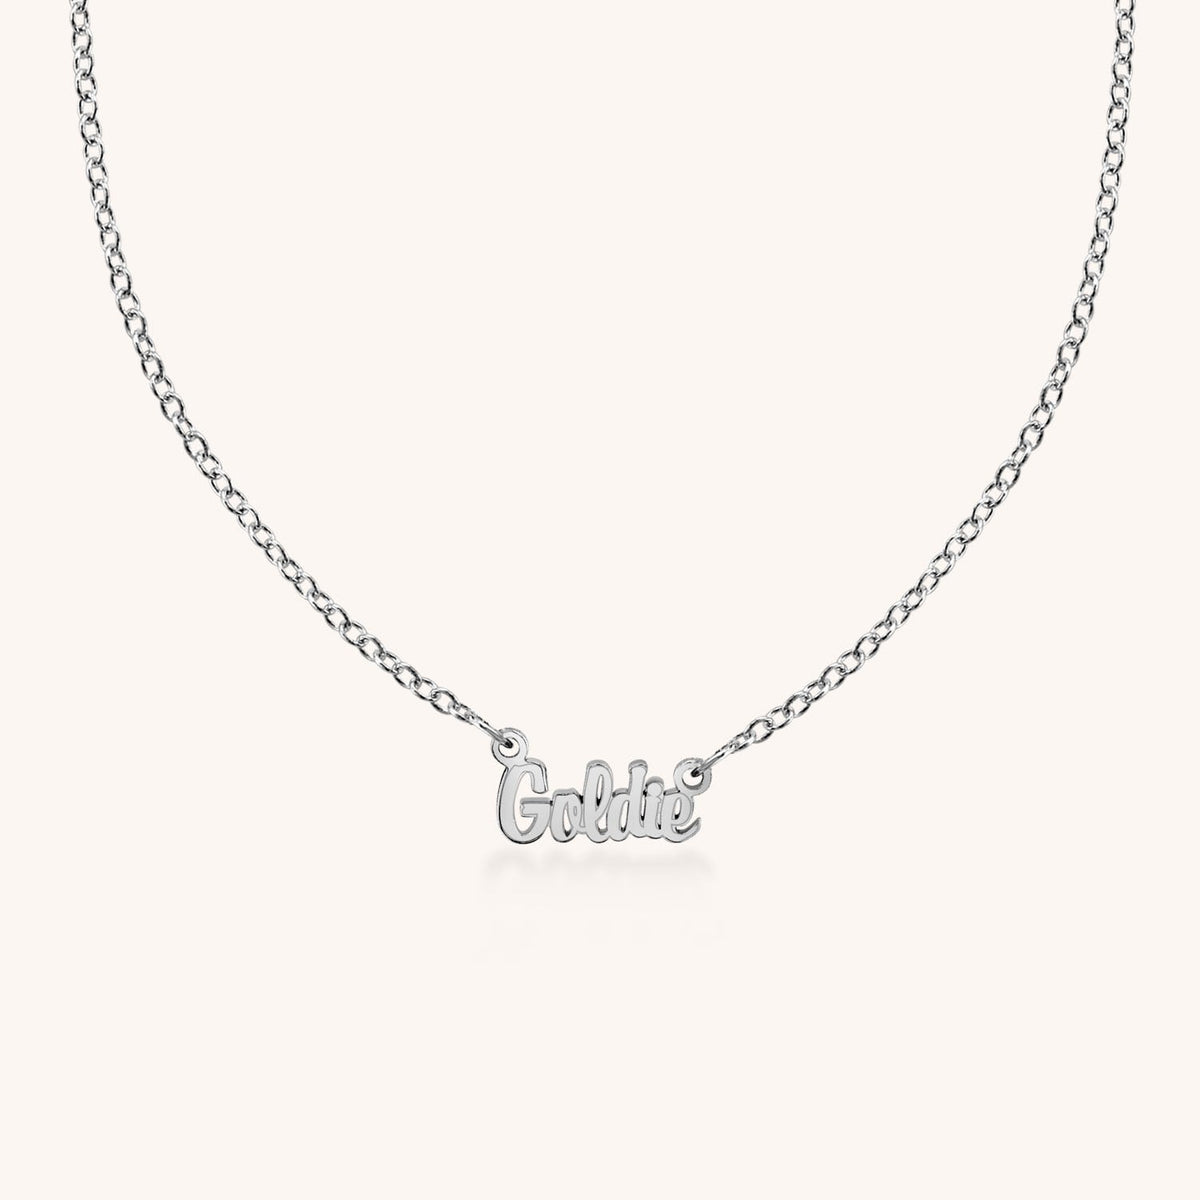 10k Gold Goldie Nameplate Necklace